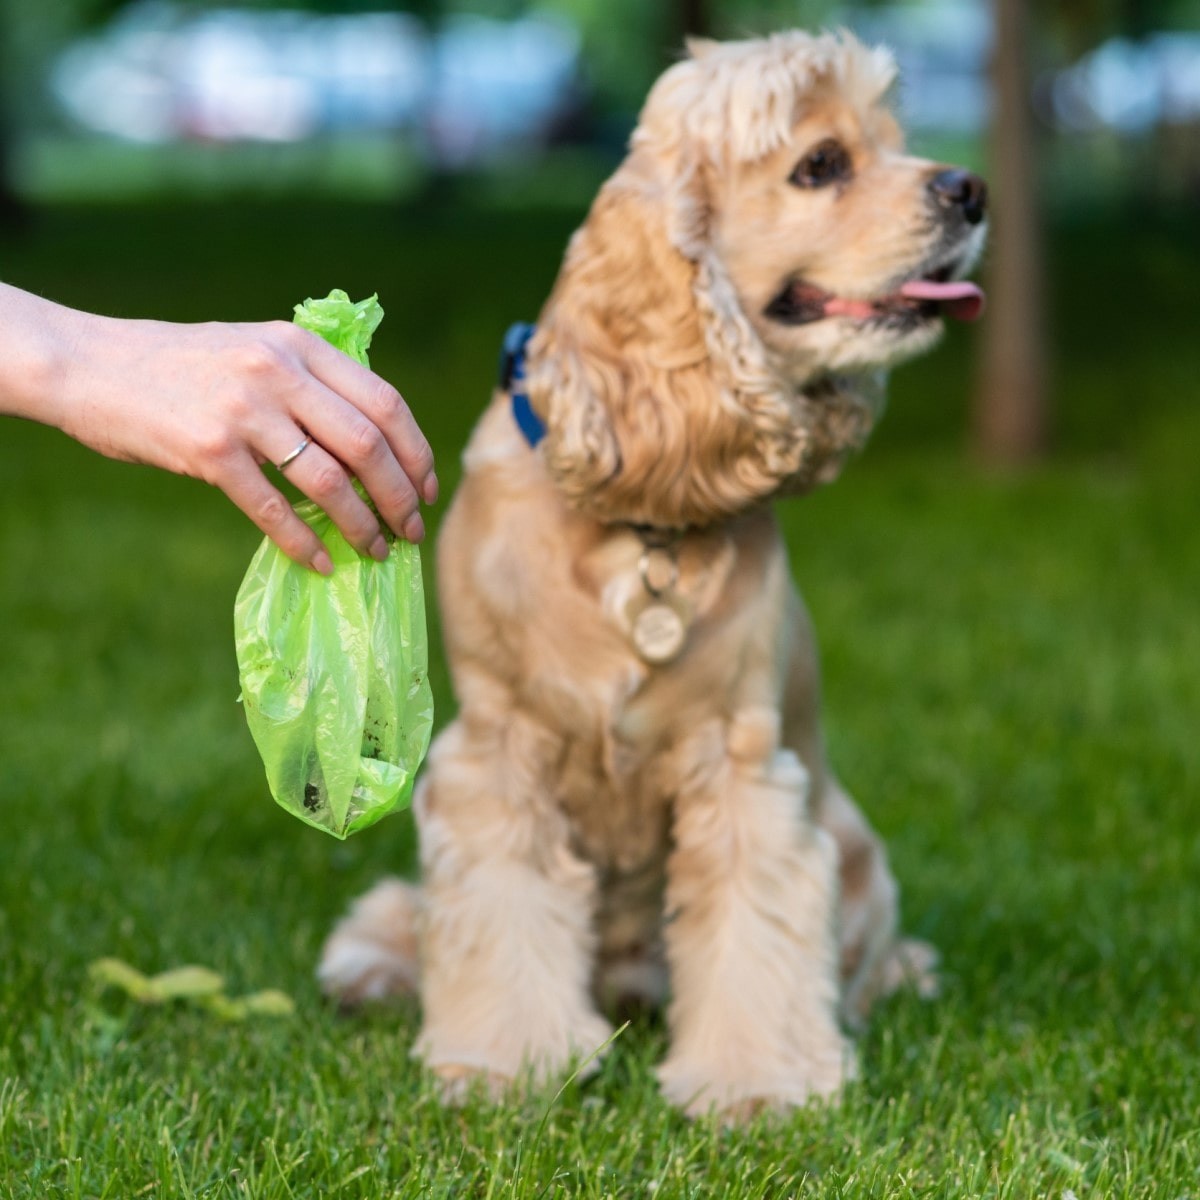 Woman holding a bag of dog poop at the park